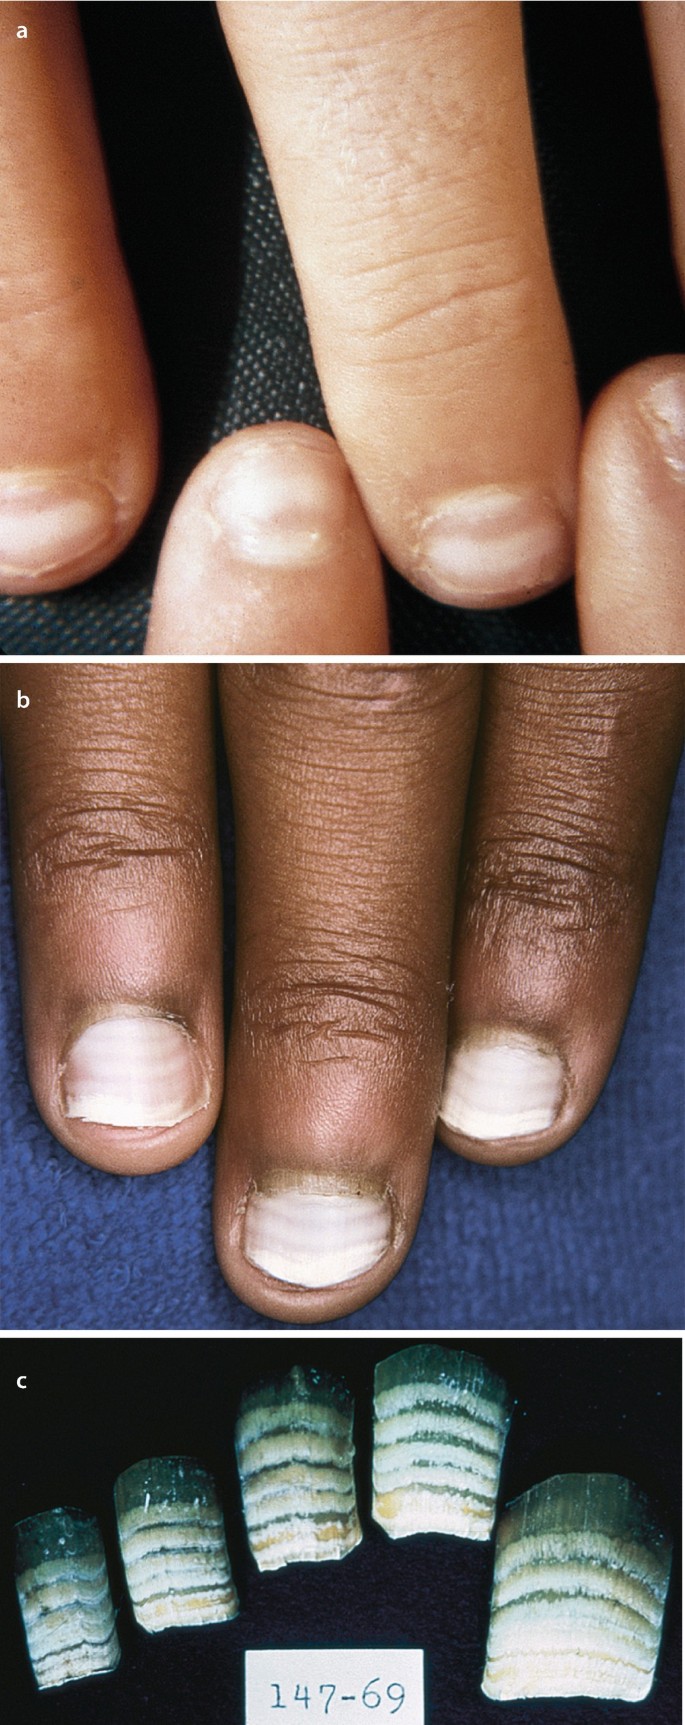 Scher and Daniel's Nails: Diagnosis, Surgery, Therapy | SpringerLink